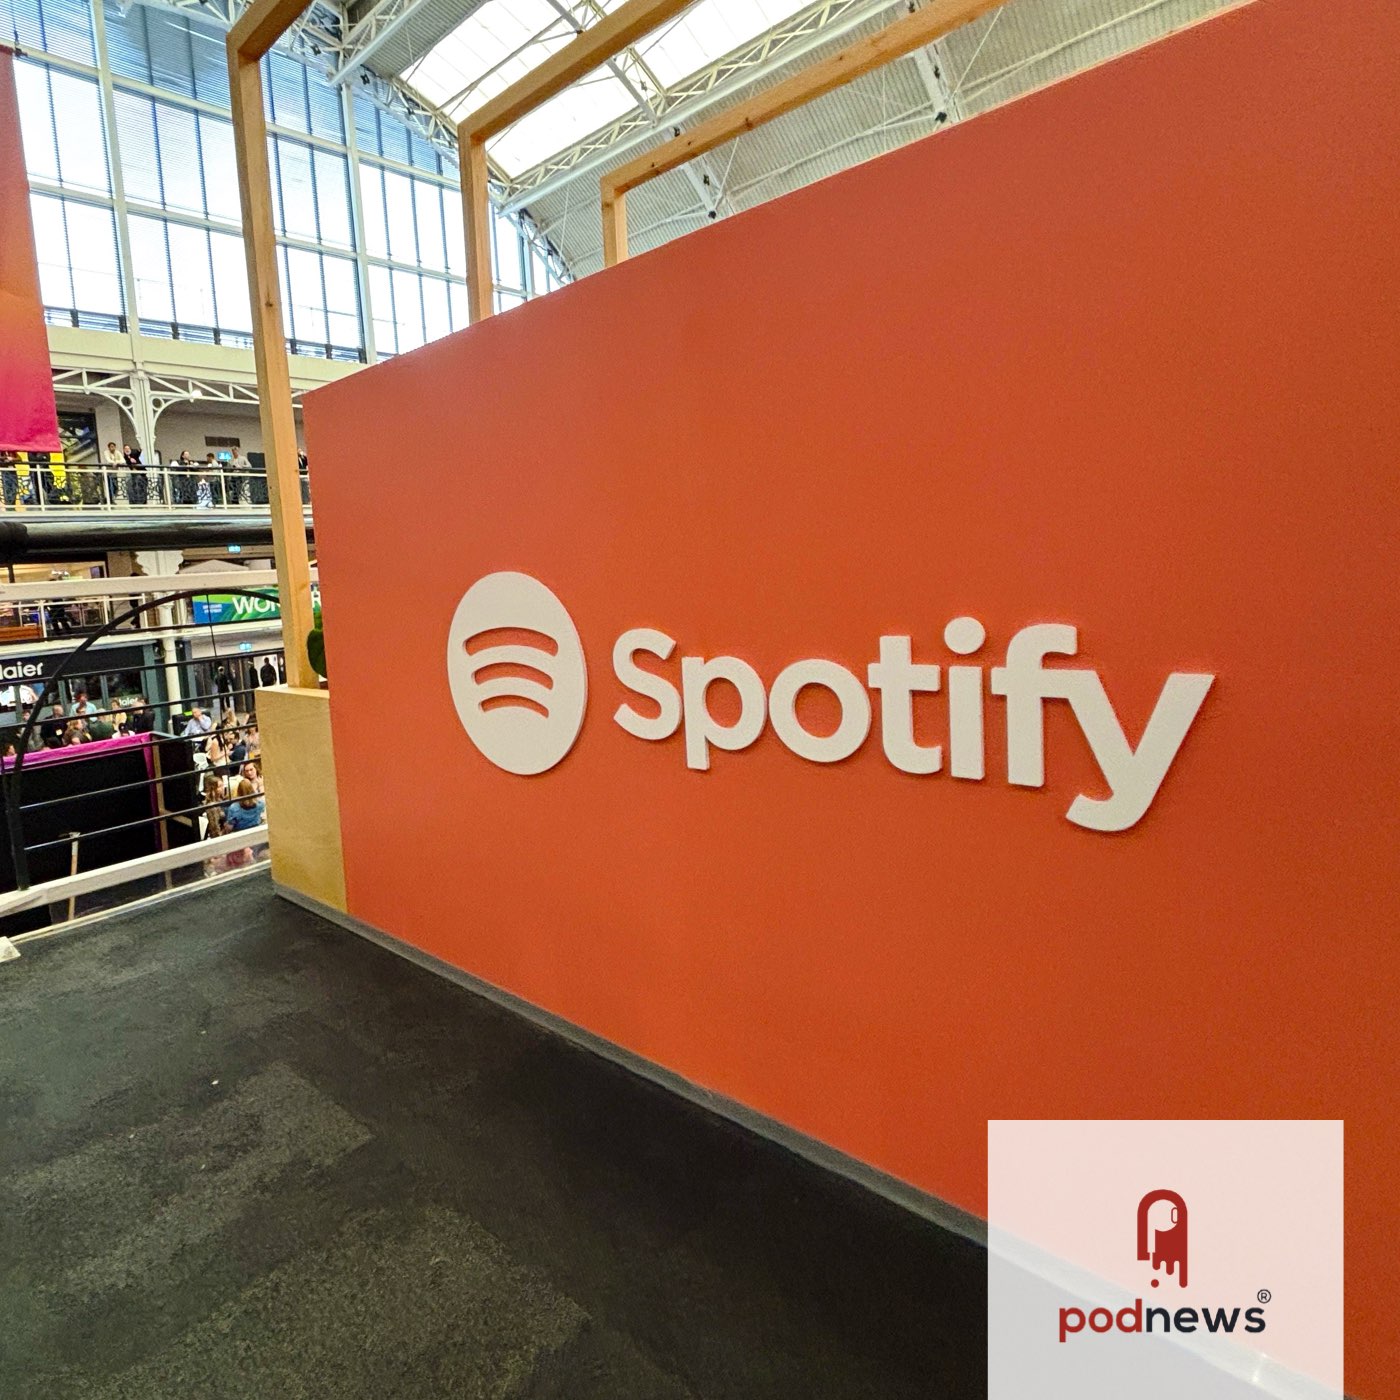 New data shows Spotify’s global dominance